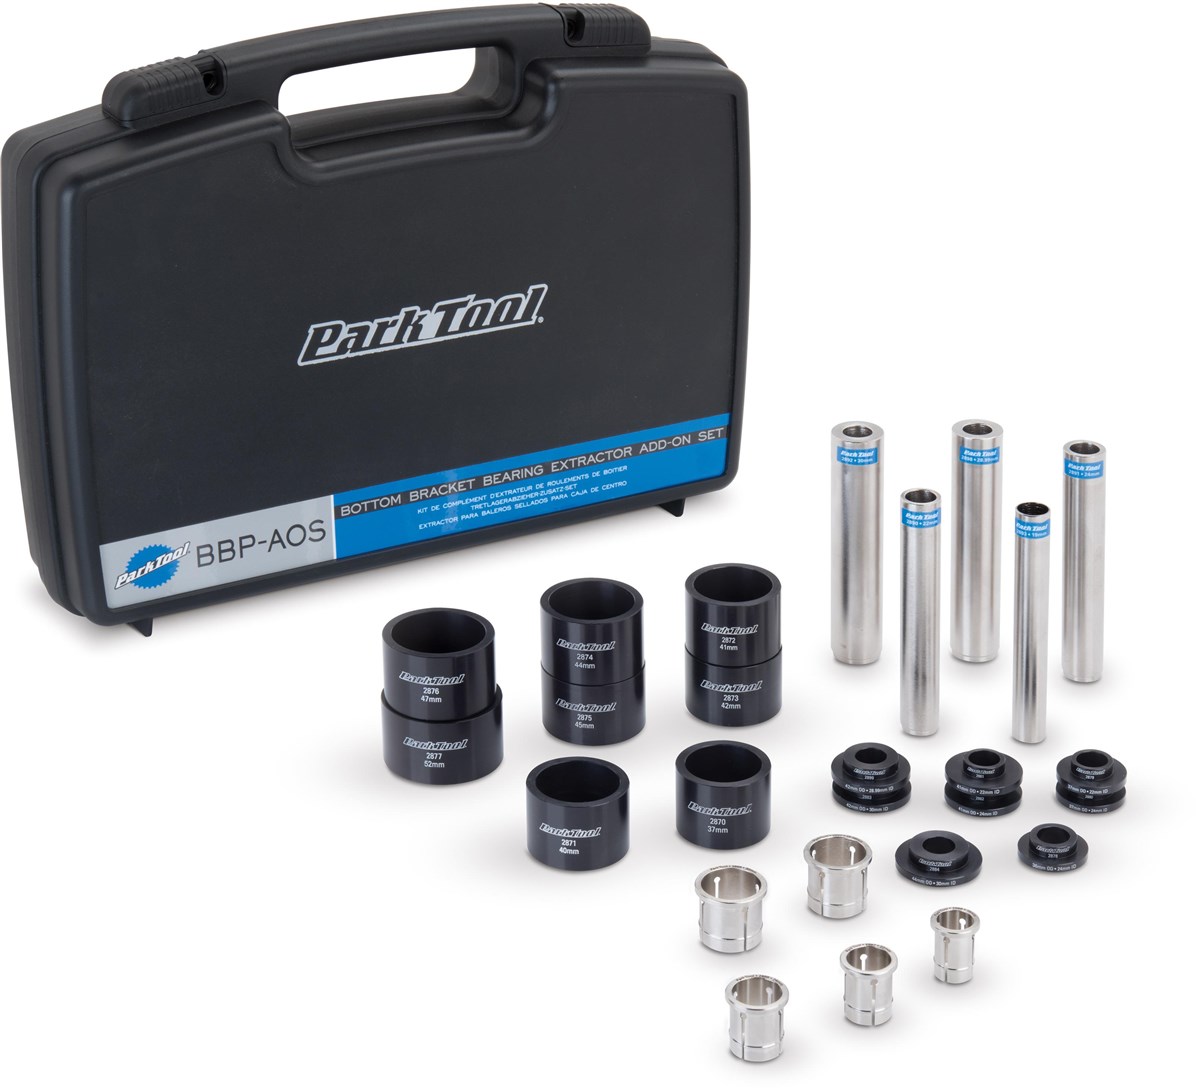 Park Tool BBP-AOS - Bottom Bracket Bearing Extractor Add-On Set product image